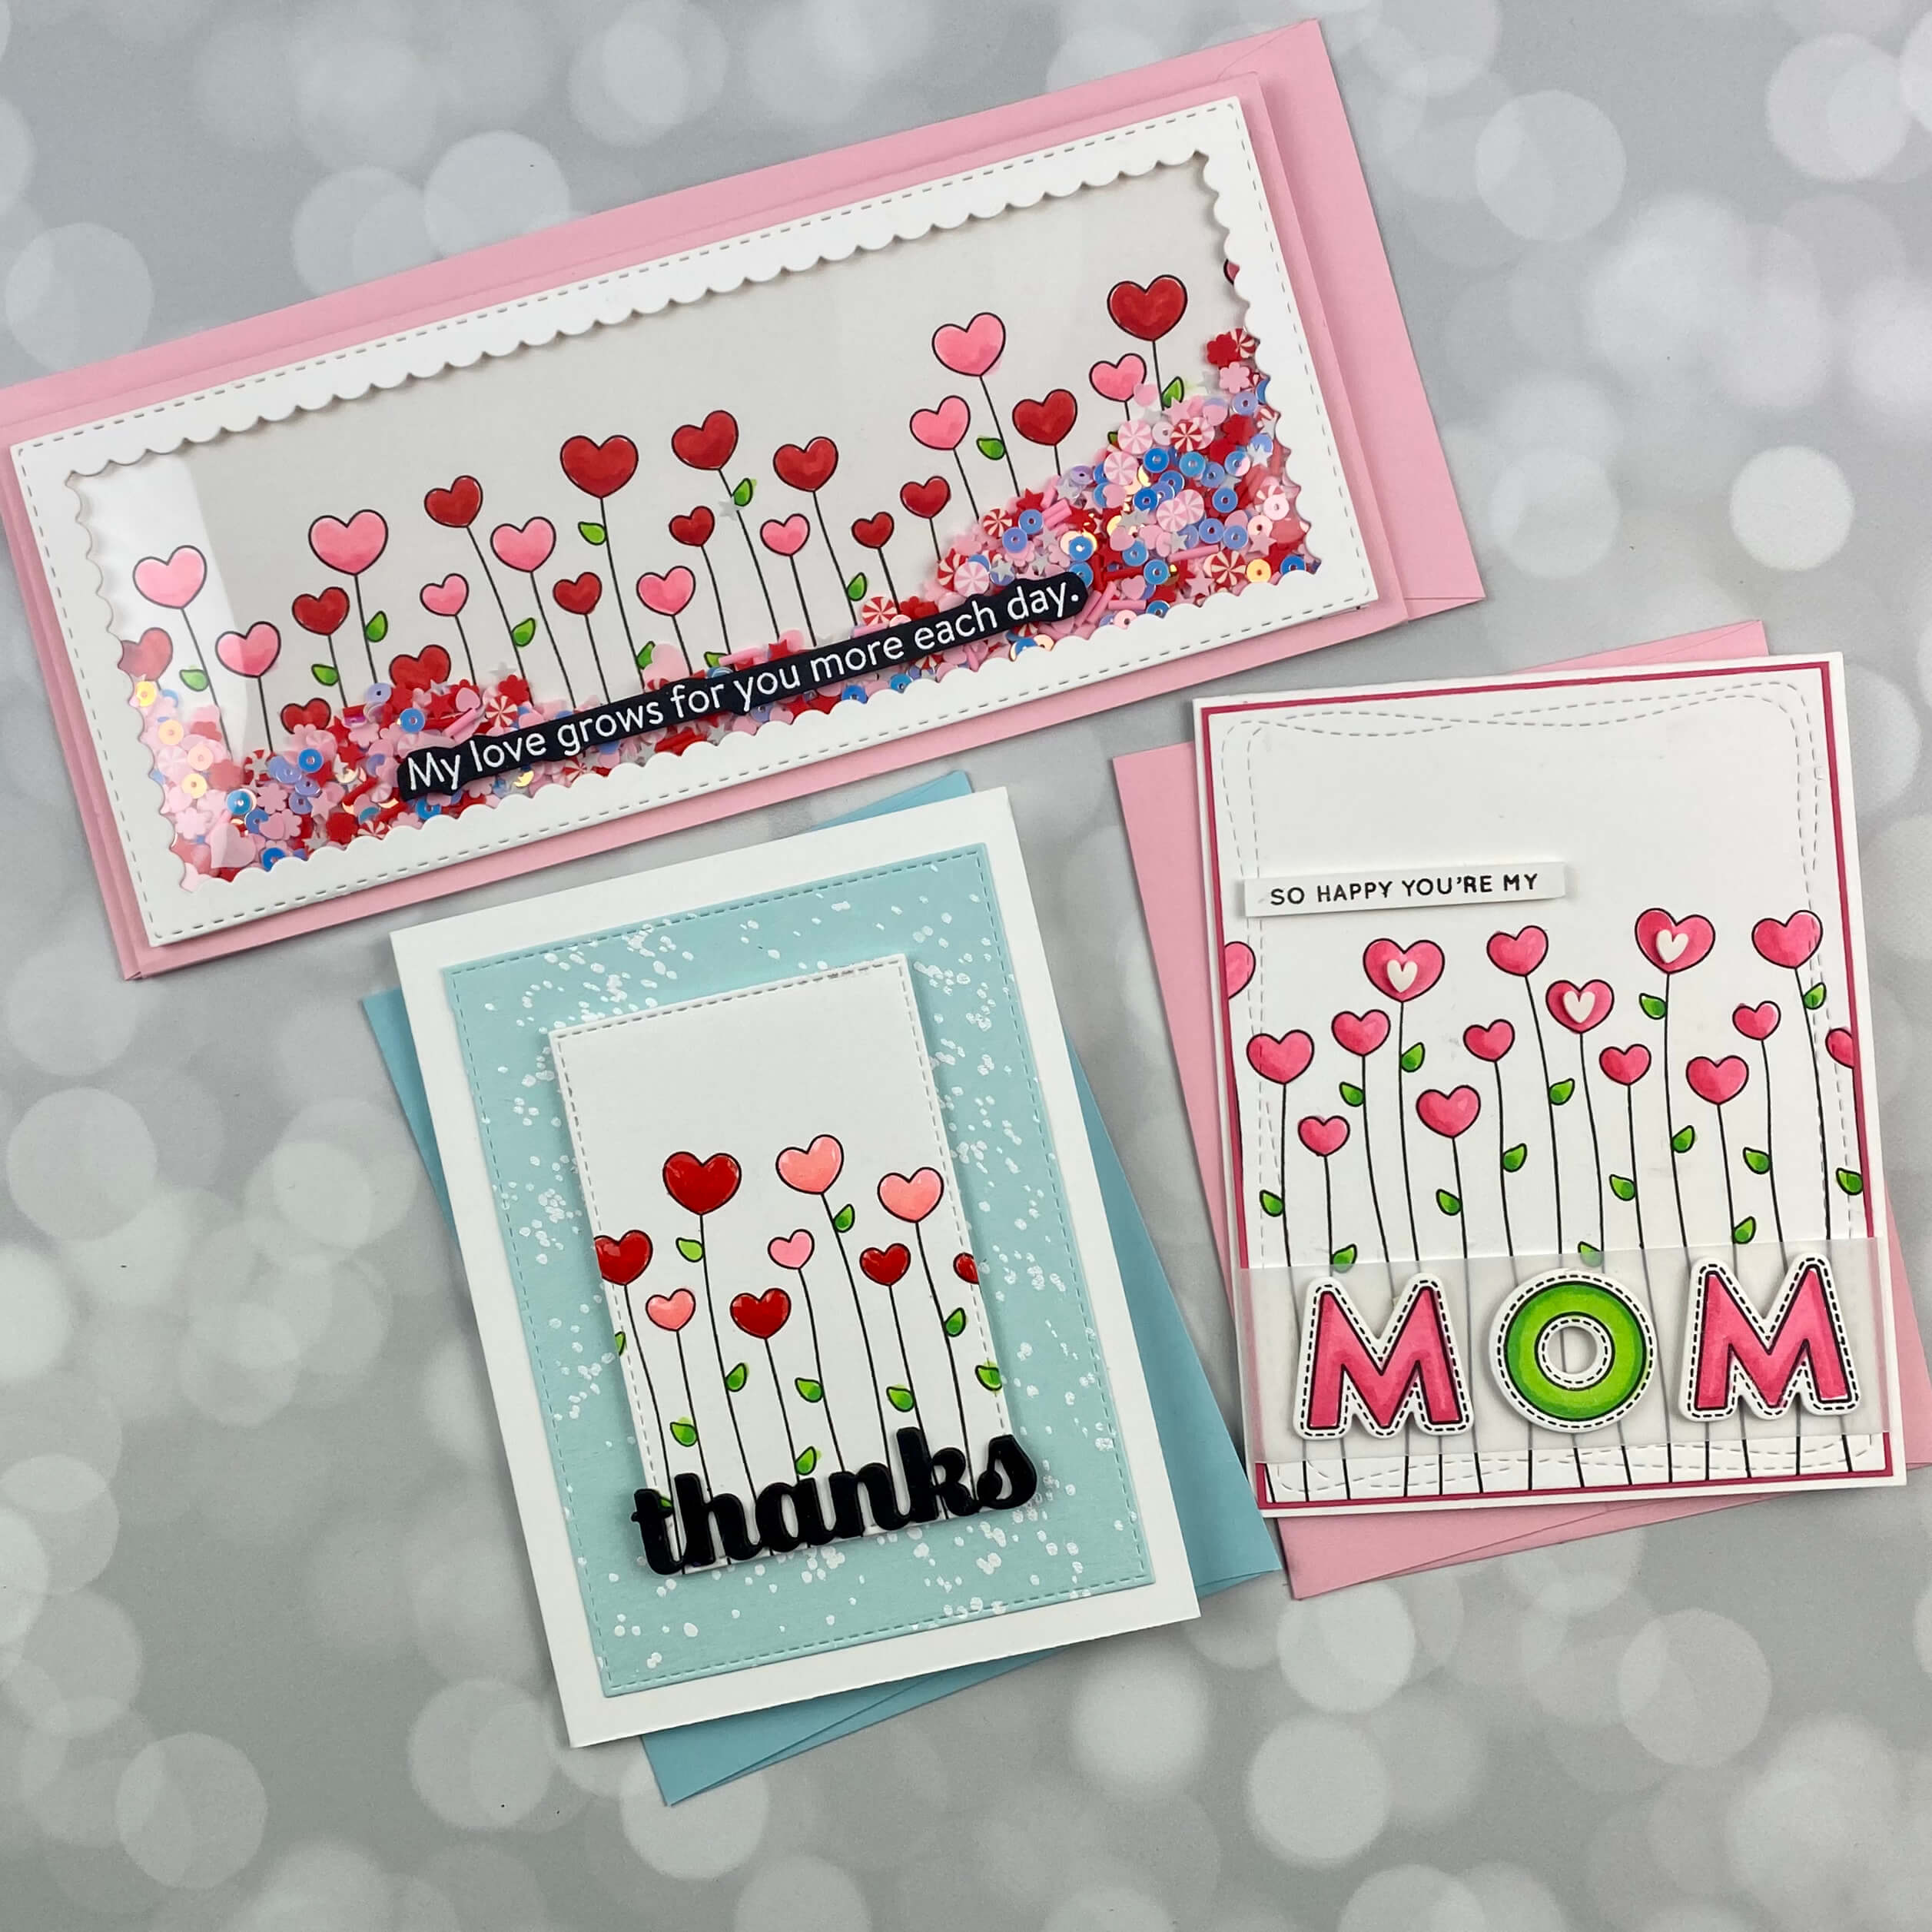 handmade cards using a stamp set with heart flowers